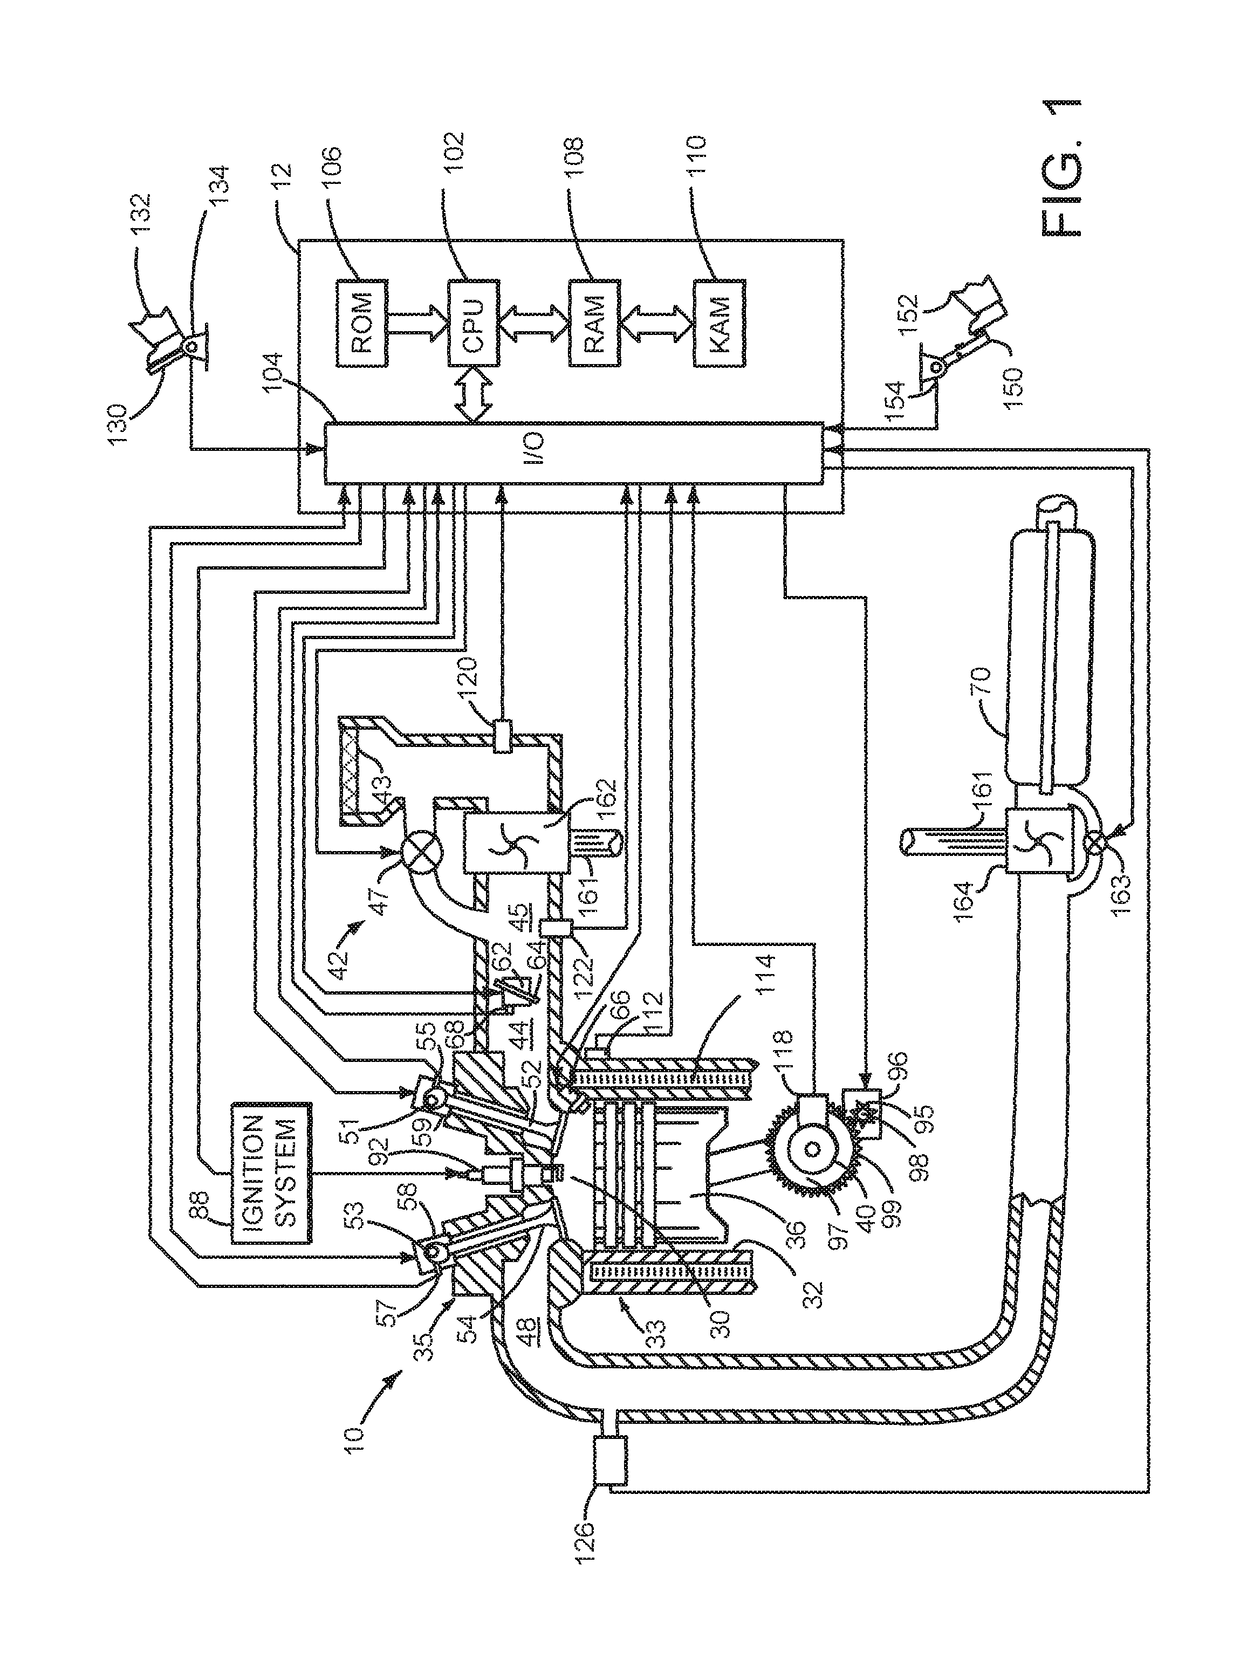 Methods and system for improving efficiency of a hybrid vehicle